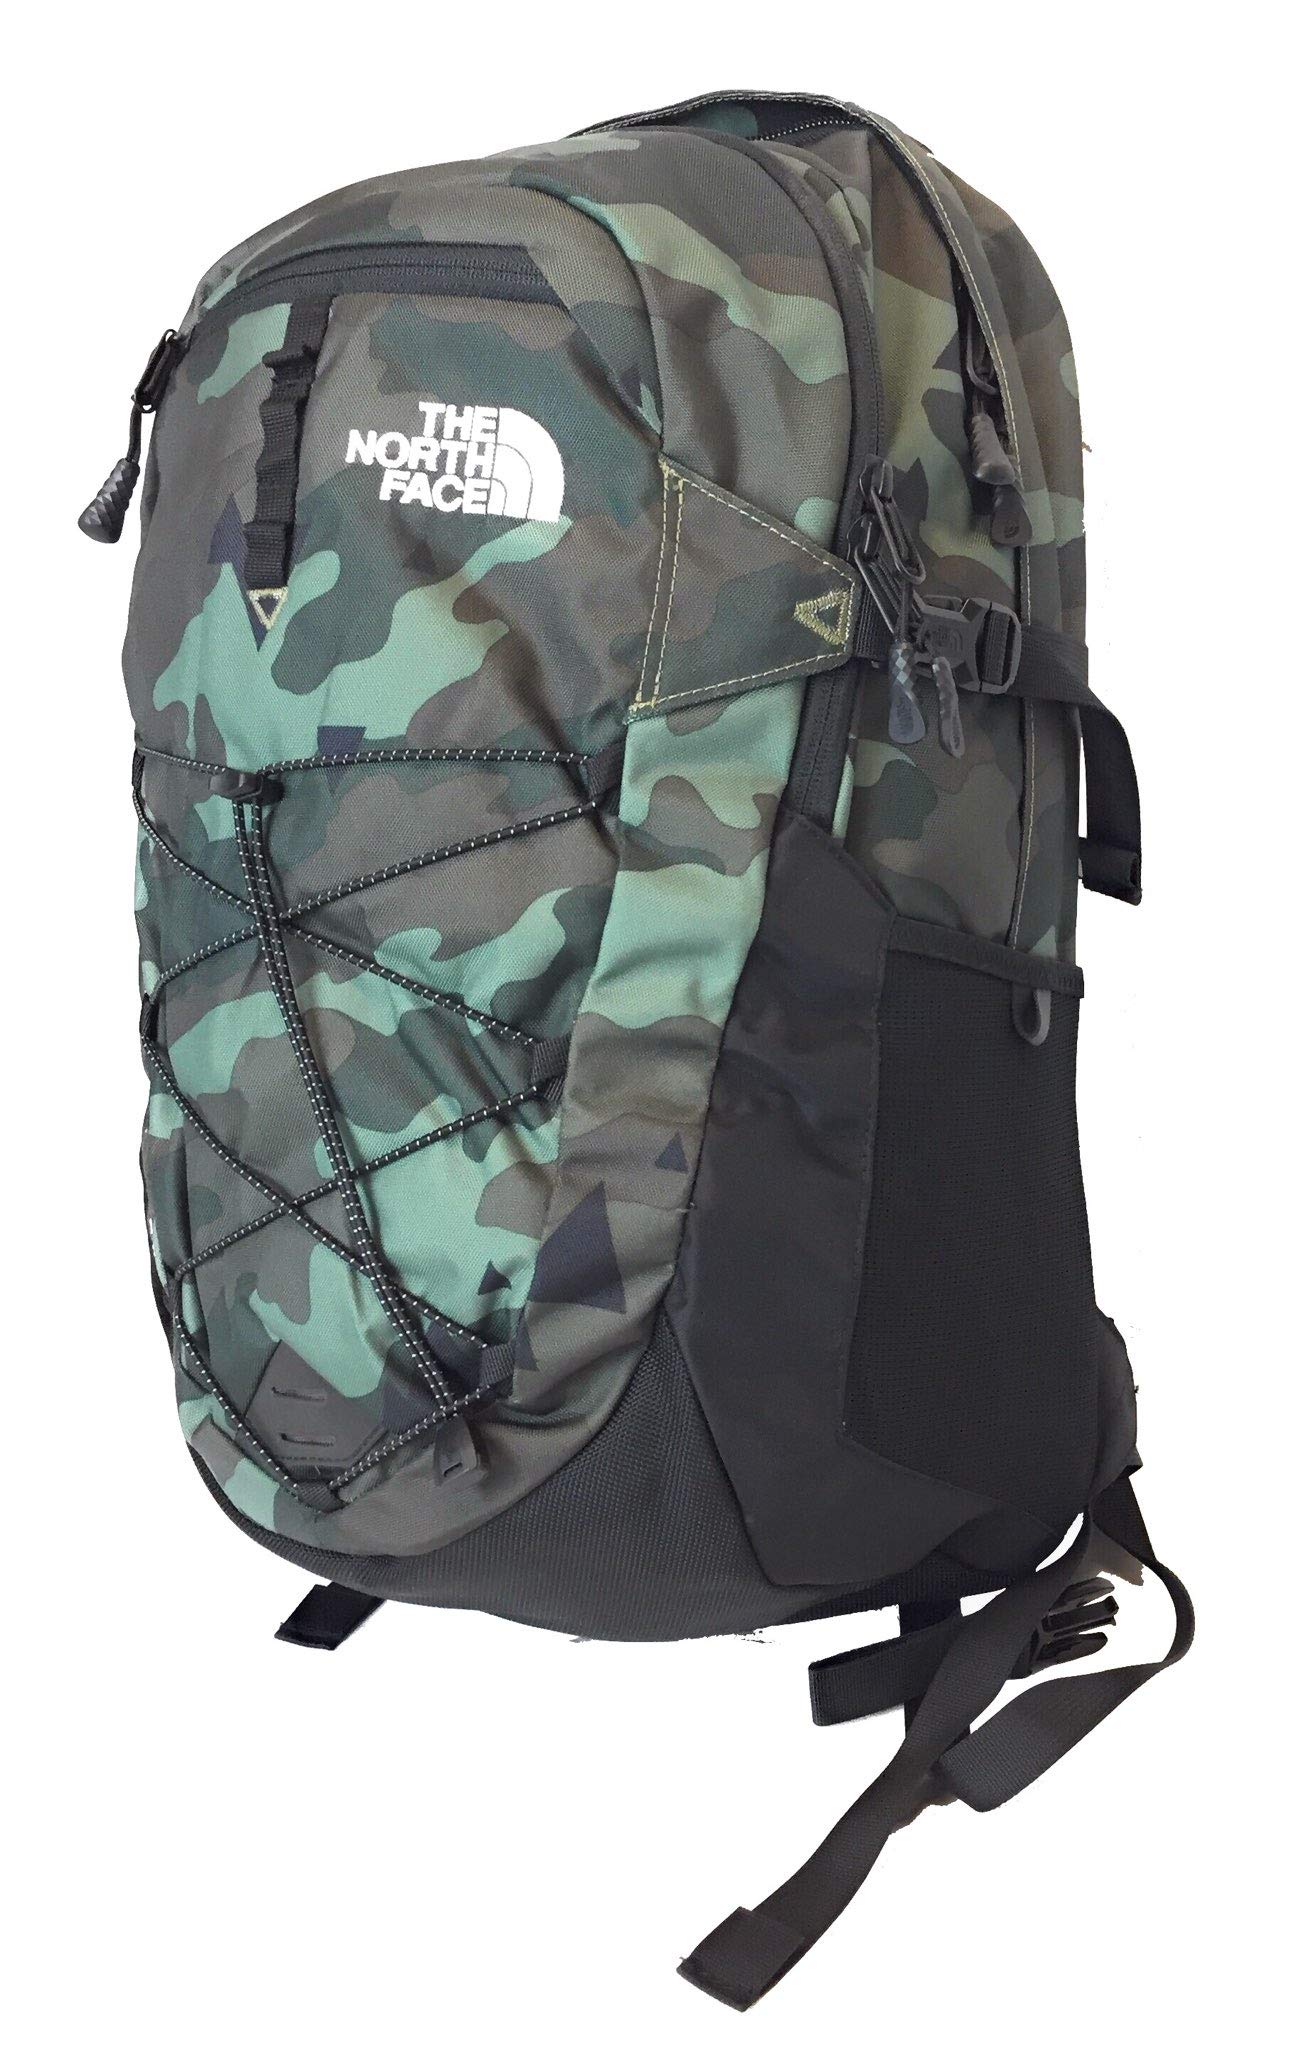 The Face Unisex Outdoor Backpack, Green Camo (Bri– backpacks4less.com